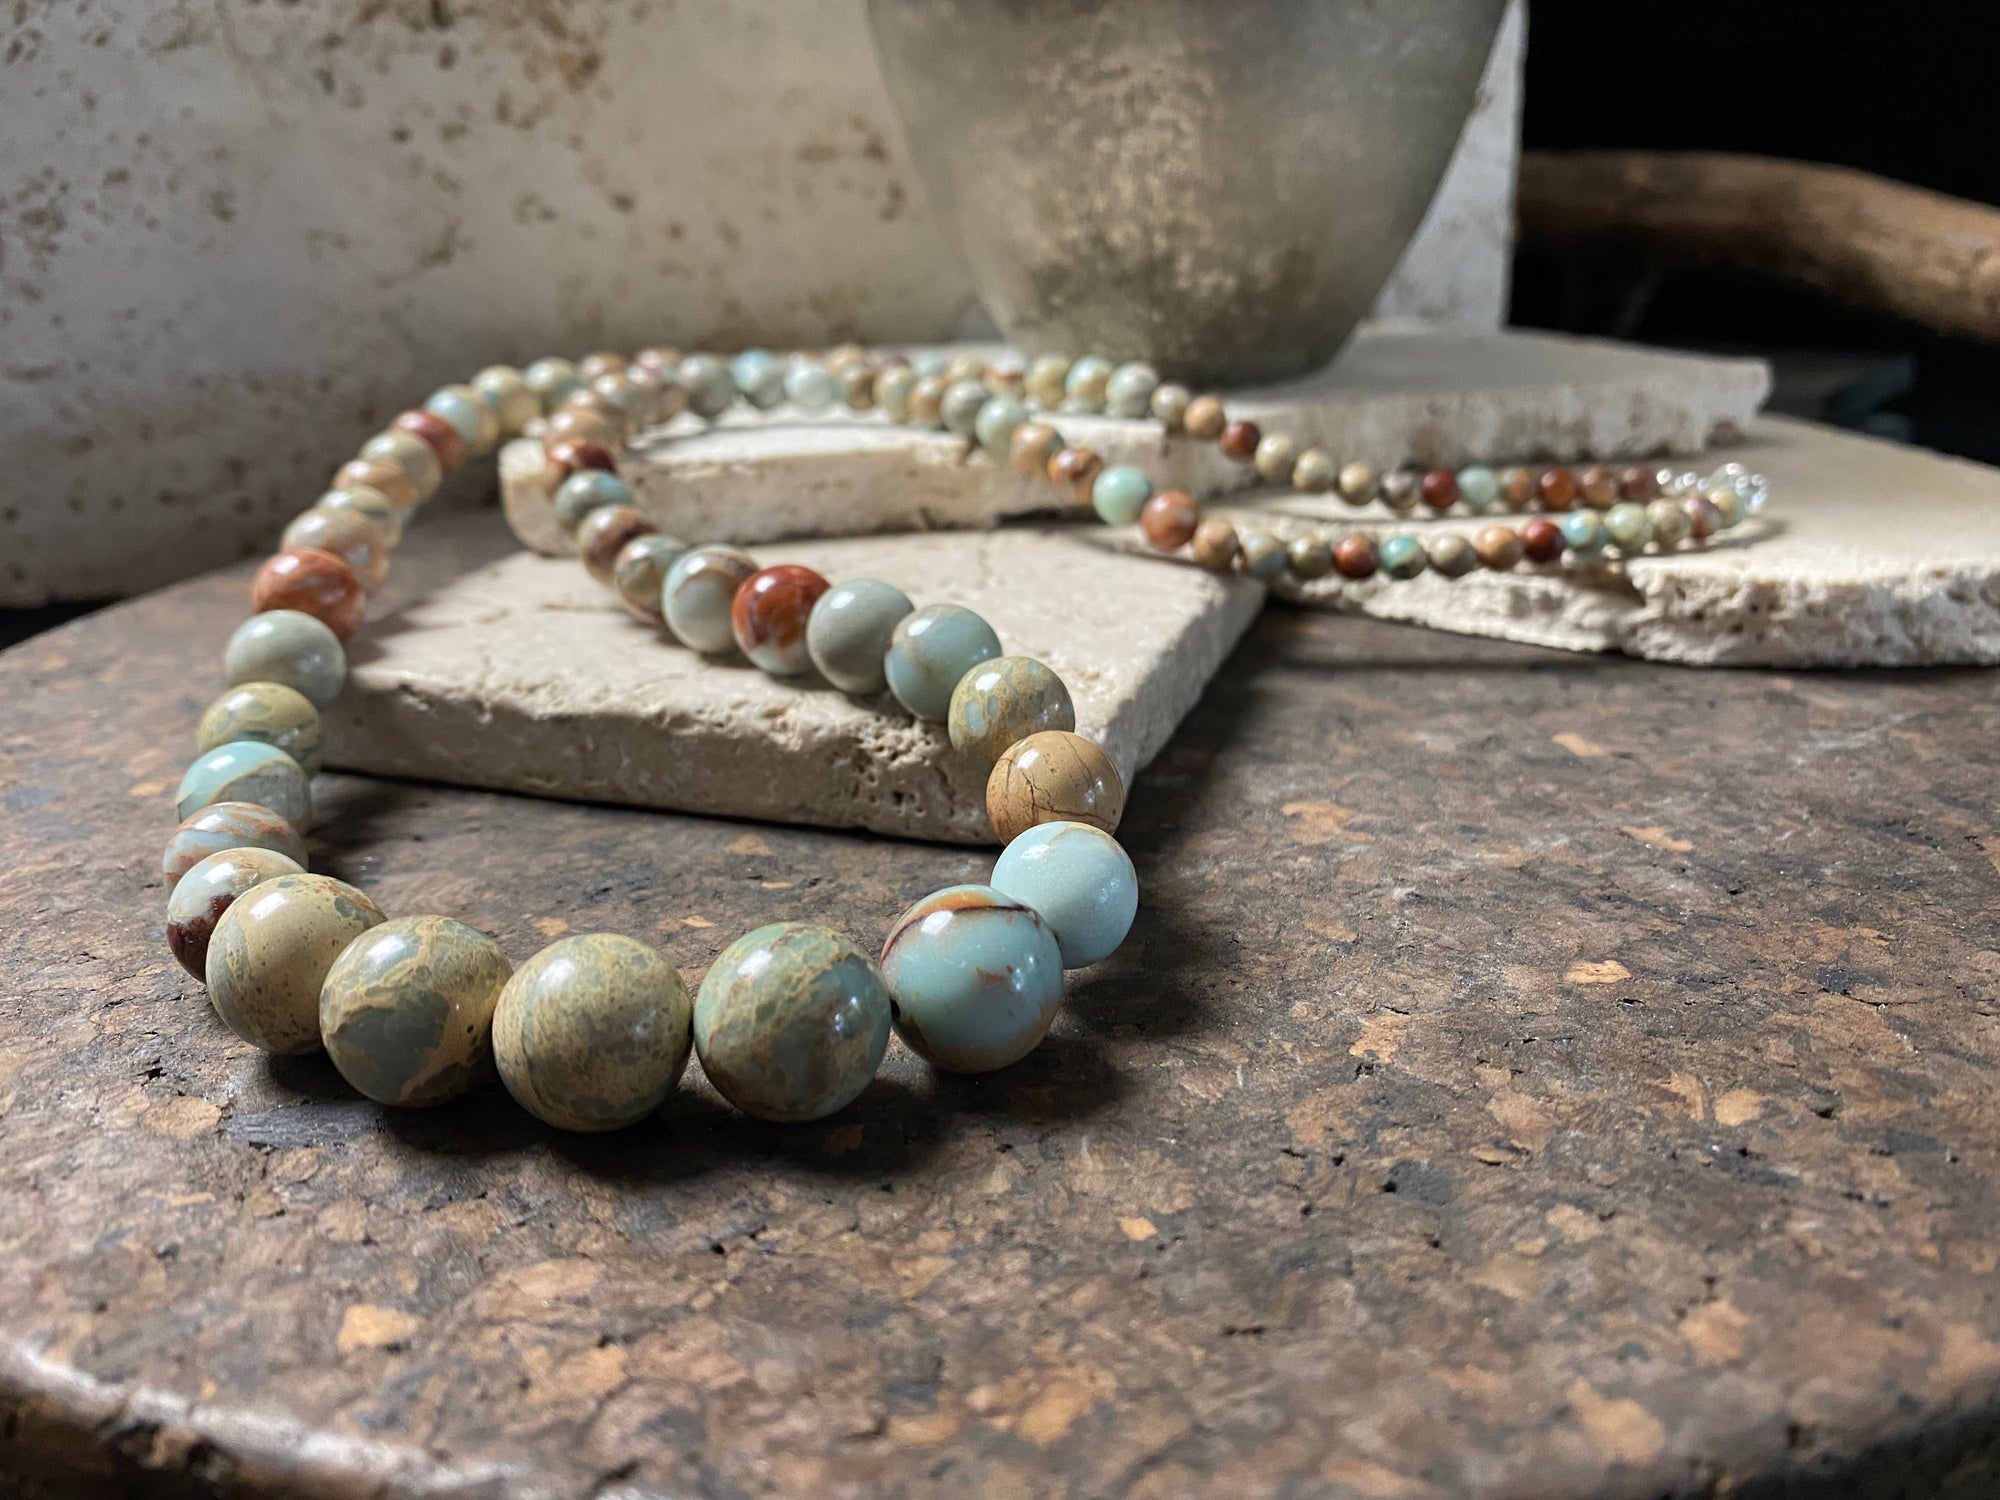 A long necklace made from perfectly matched, graduated Ethiopian opal beads, finished with sterling silver findings. Hook clasp. Measurements: 80 cm (31.5"), largest bead 14 mm diameter, smallest bead 6 mm diameter.